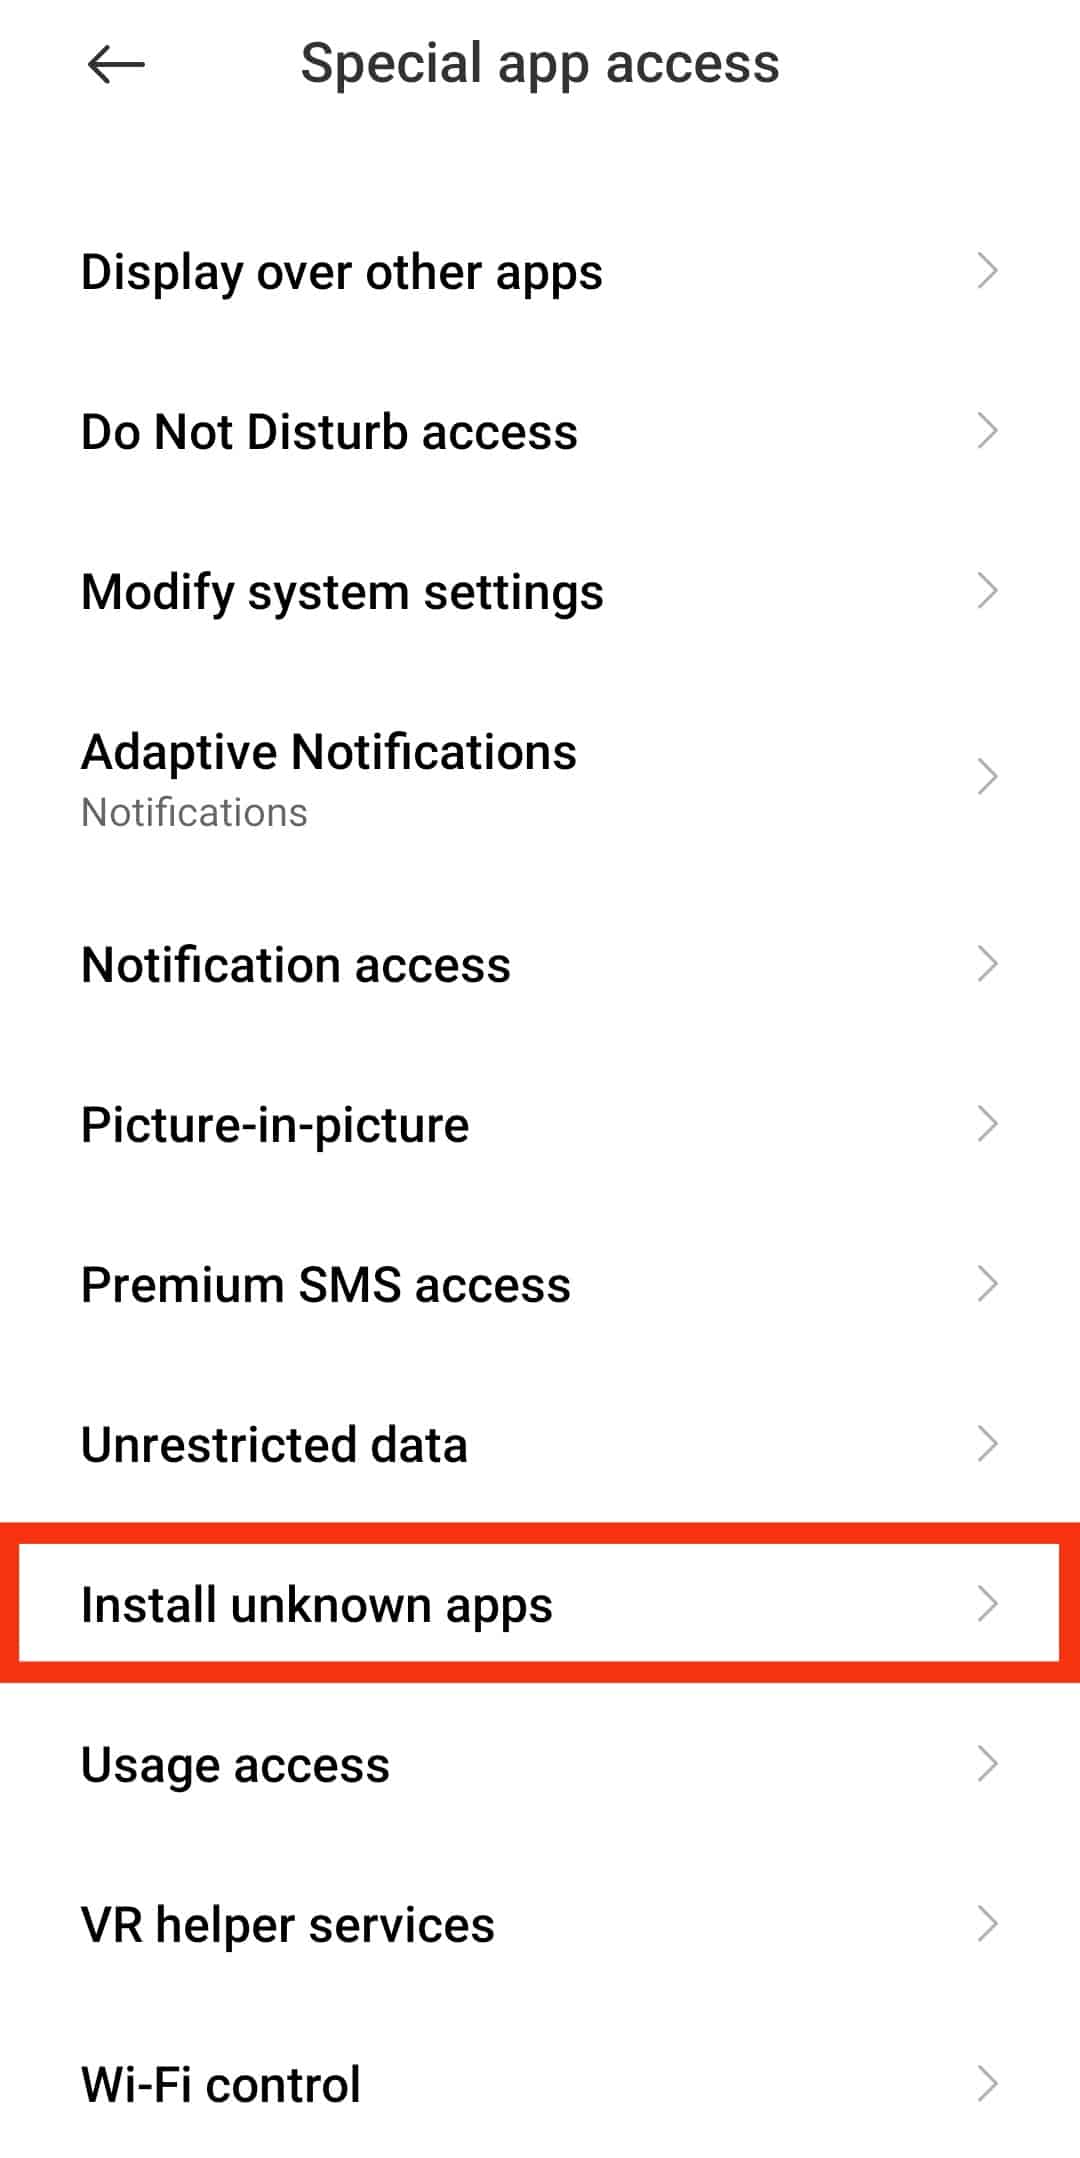 Scroll Down And Tap On Install Unknown Apps